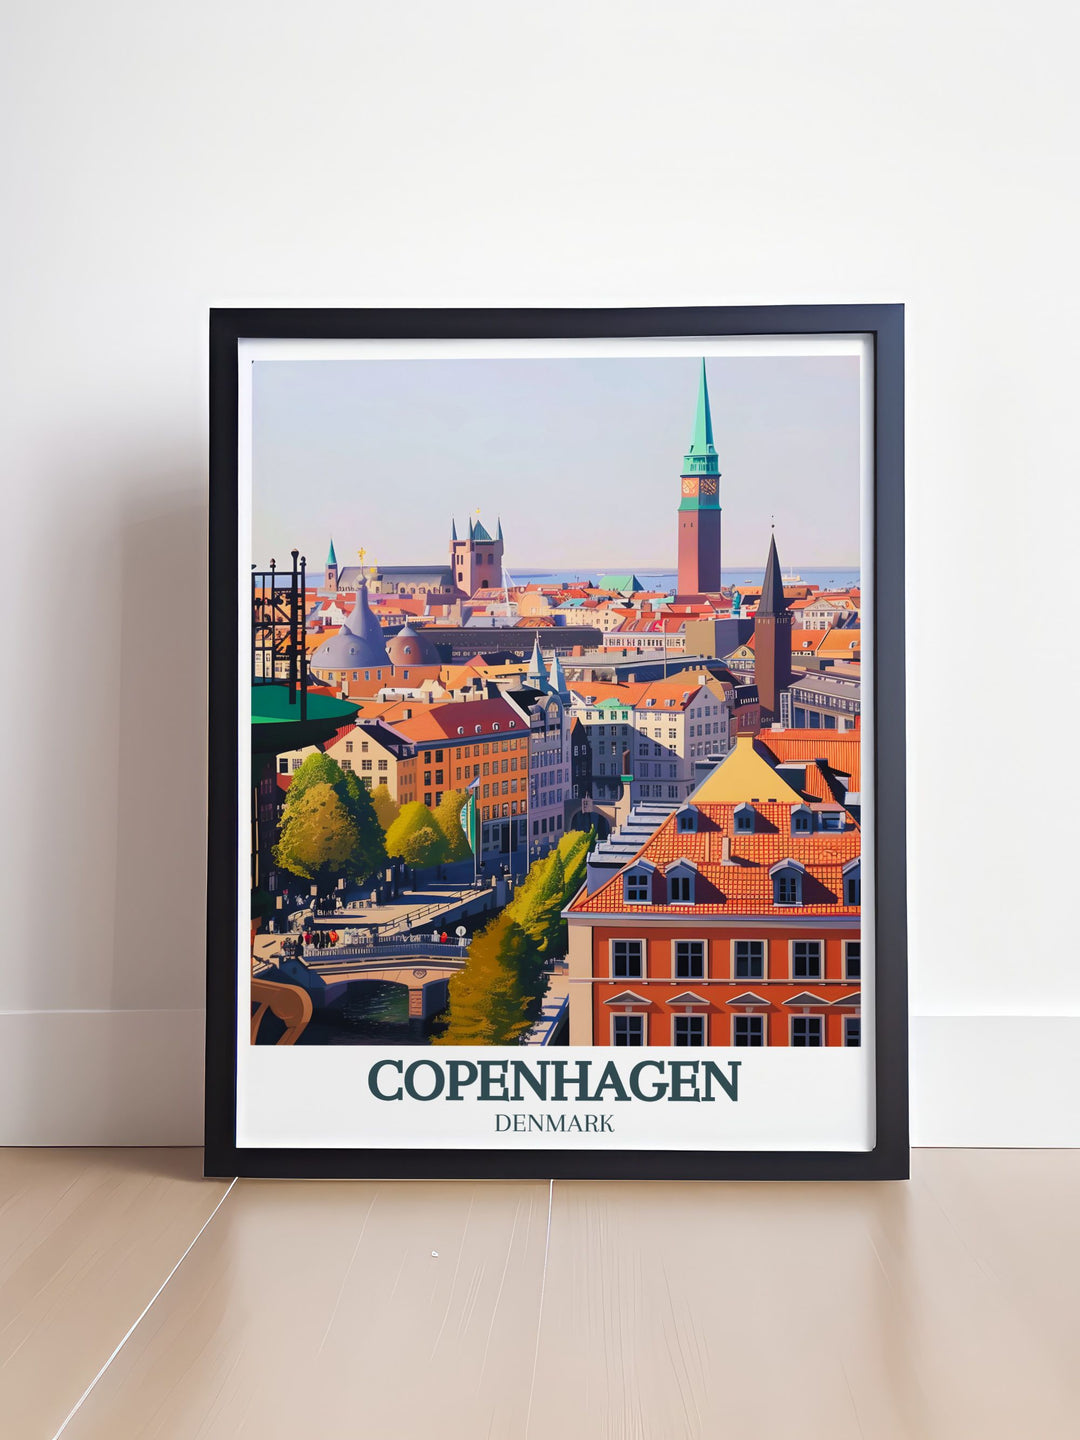 Celebrate the beauty of Copenhagen with this exquisite art print featuring The Round Tower view, Copenhagen city hall. Perfect for enhancing your home decor with a blend of modern and classic elements.